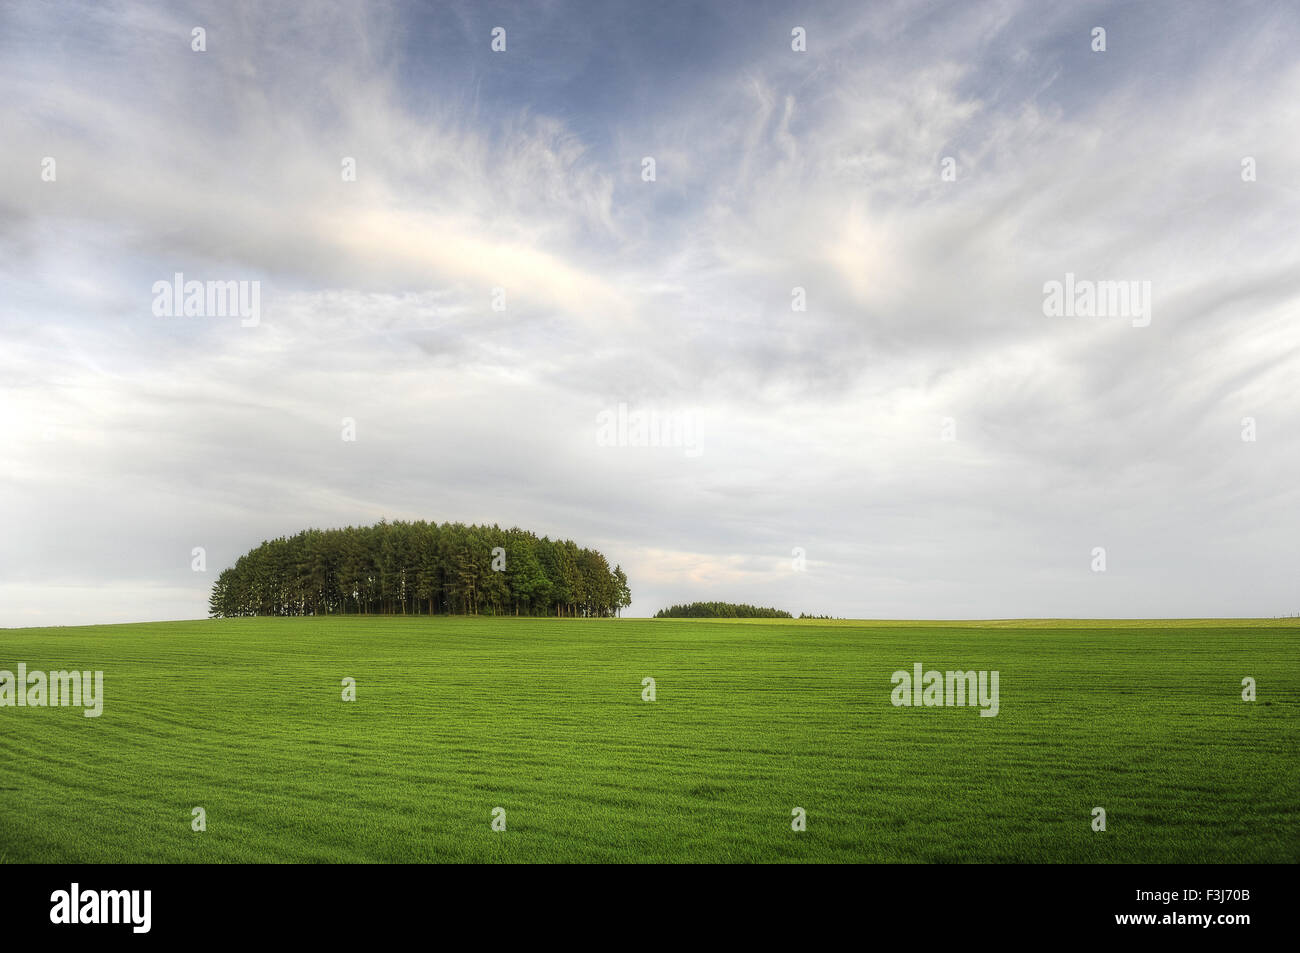 Landscape in the Belgian Ardennes with pine forest on a hill Stock Photo